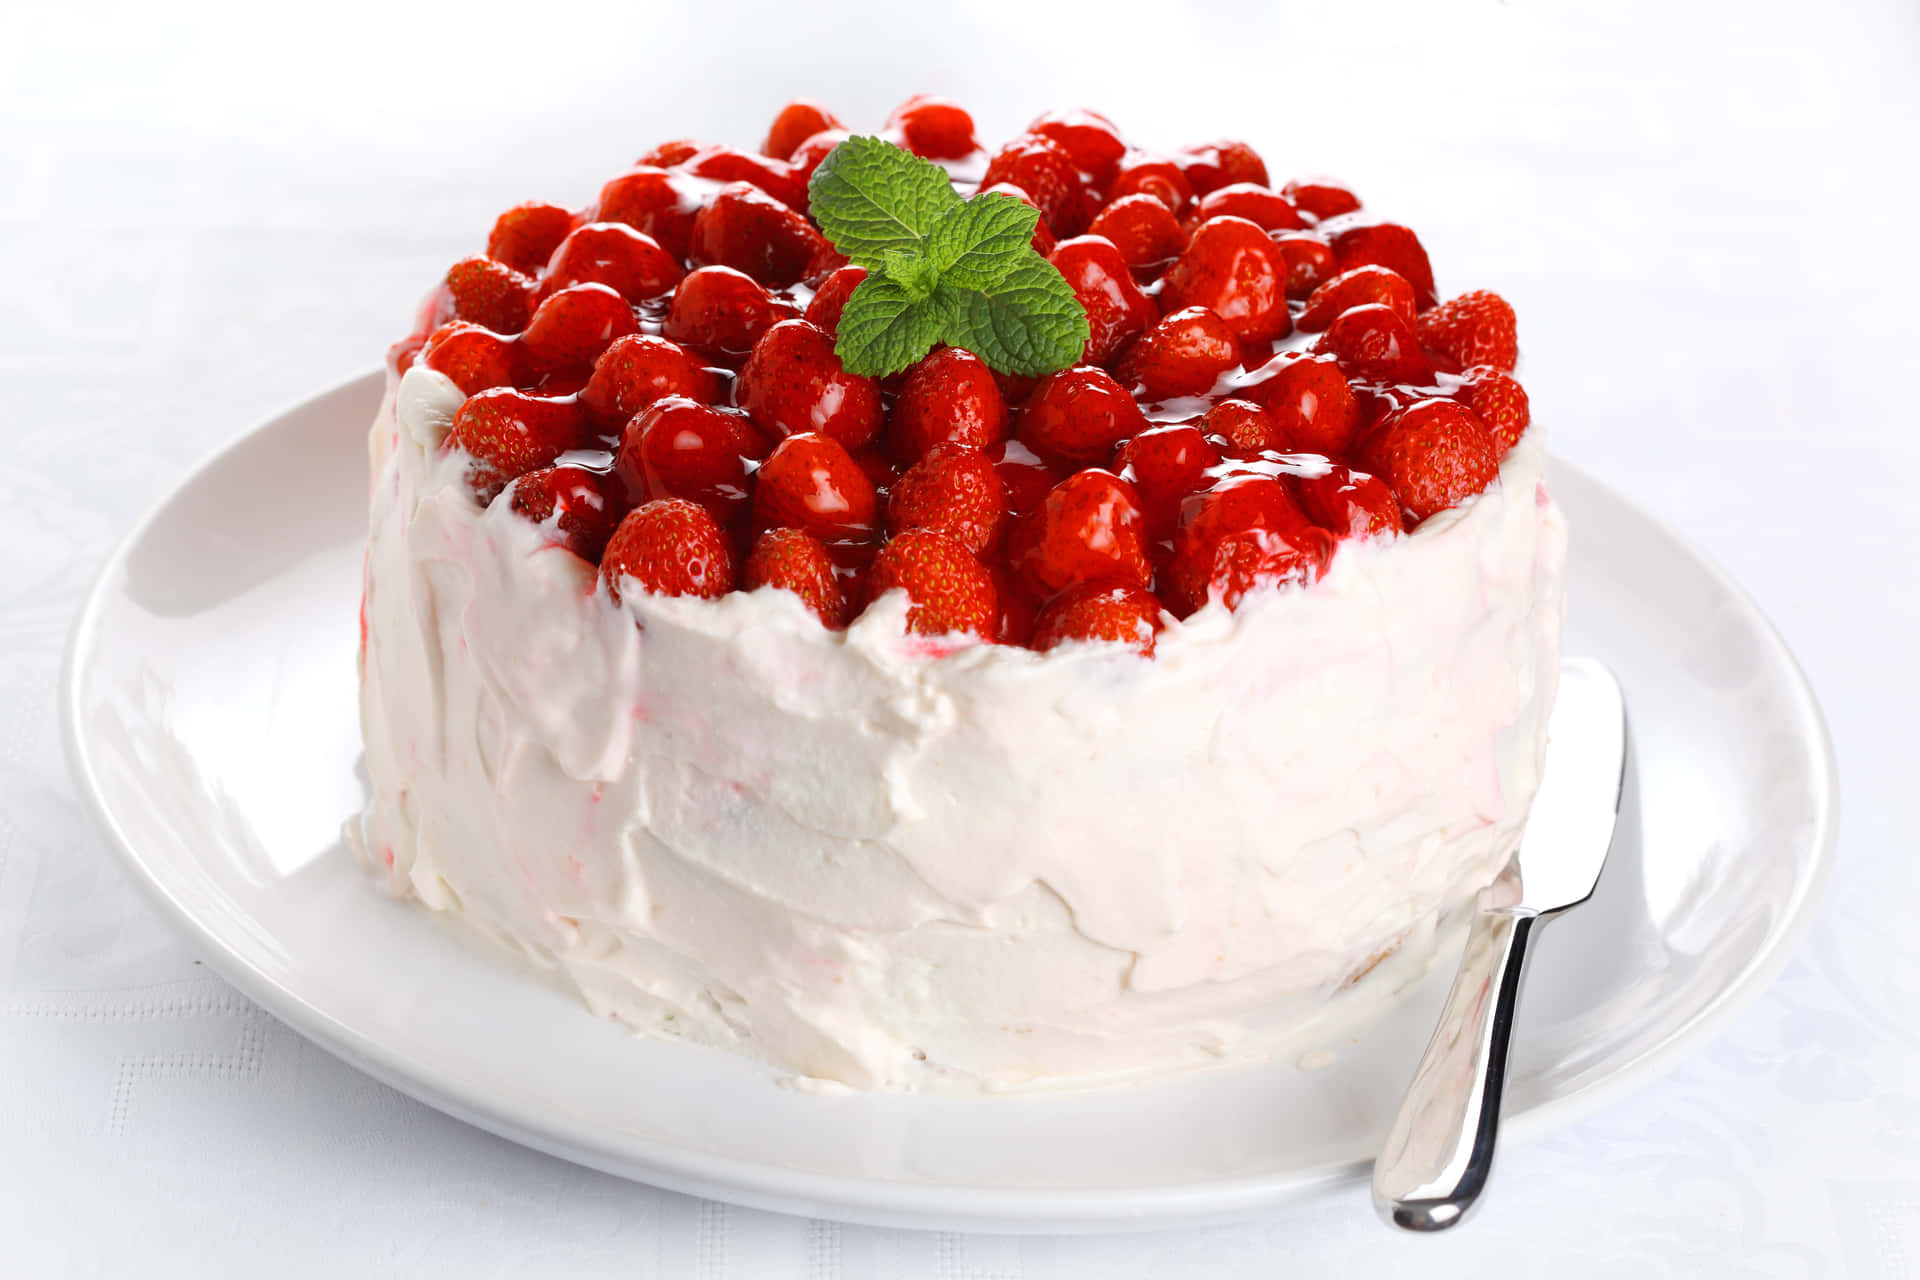 Decorate your day with a yummy Cake!